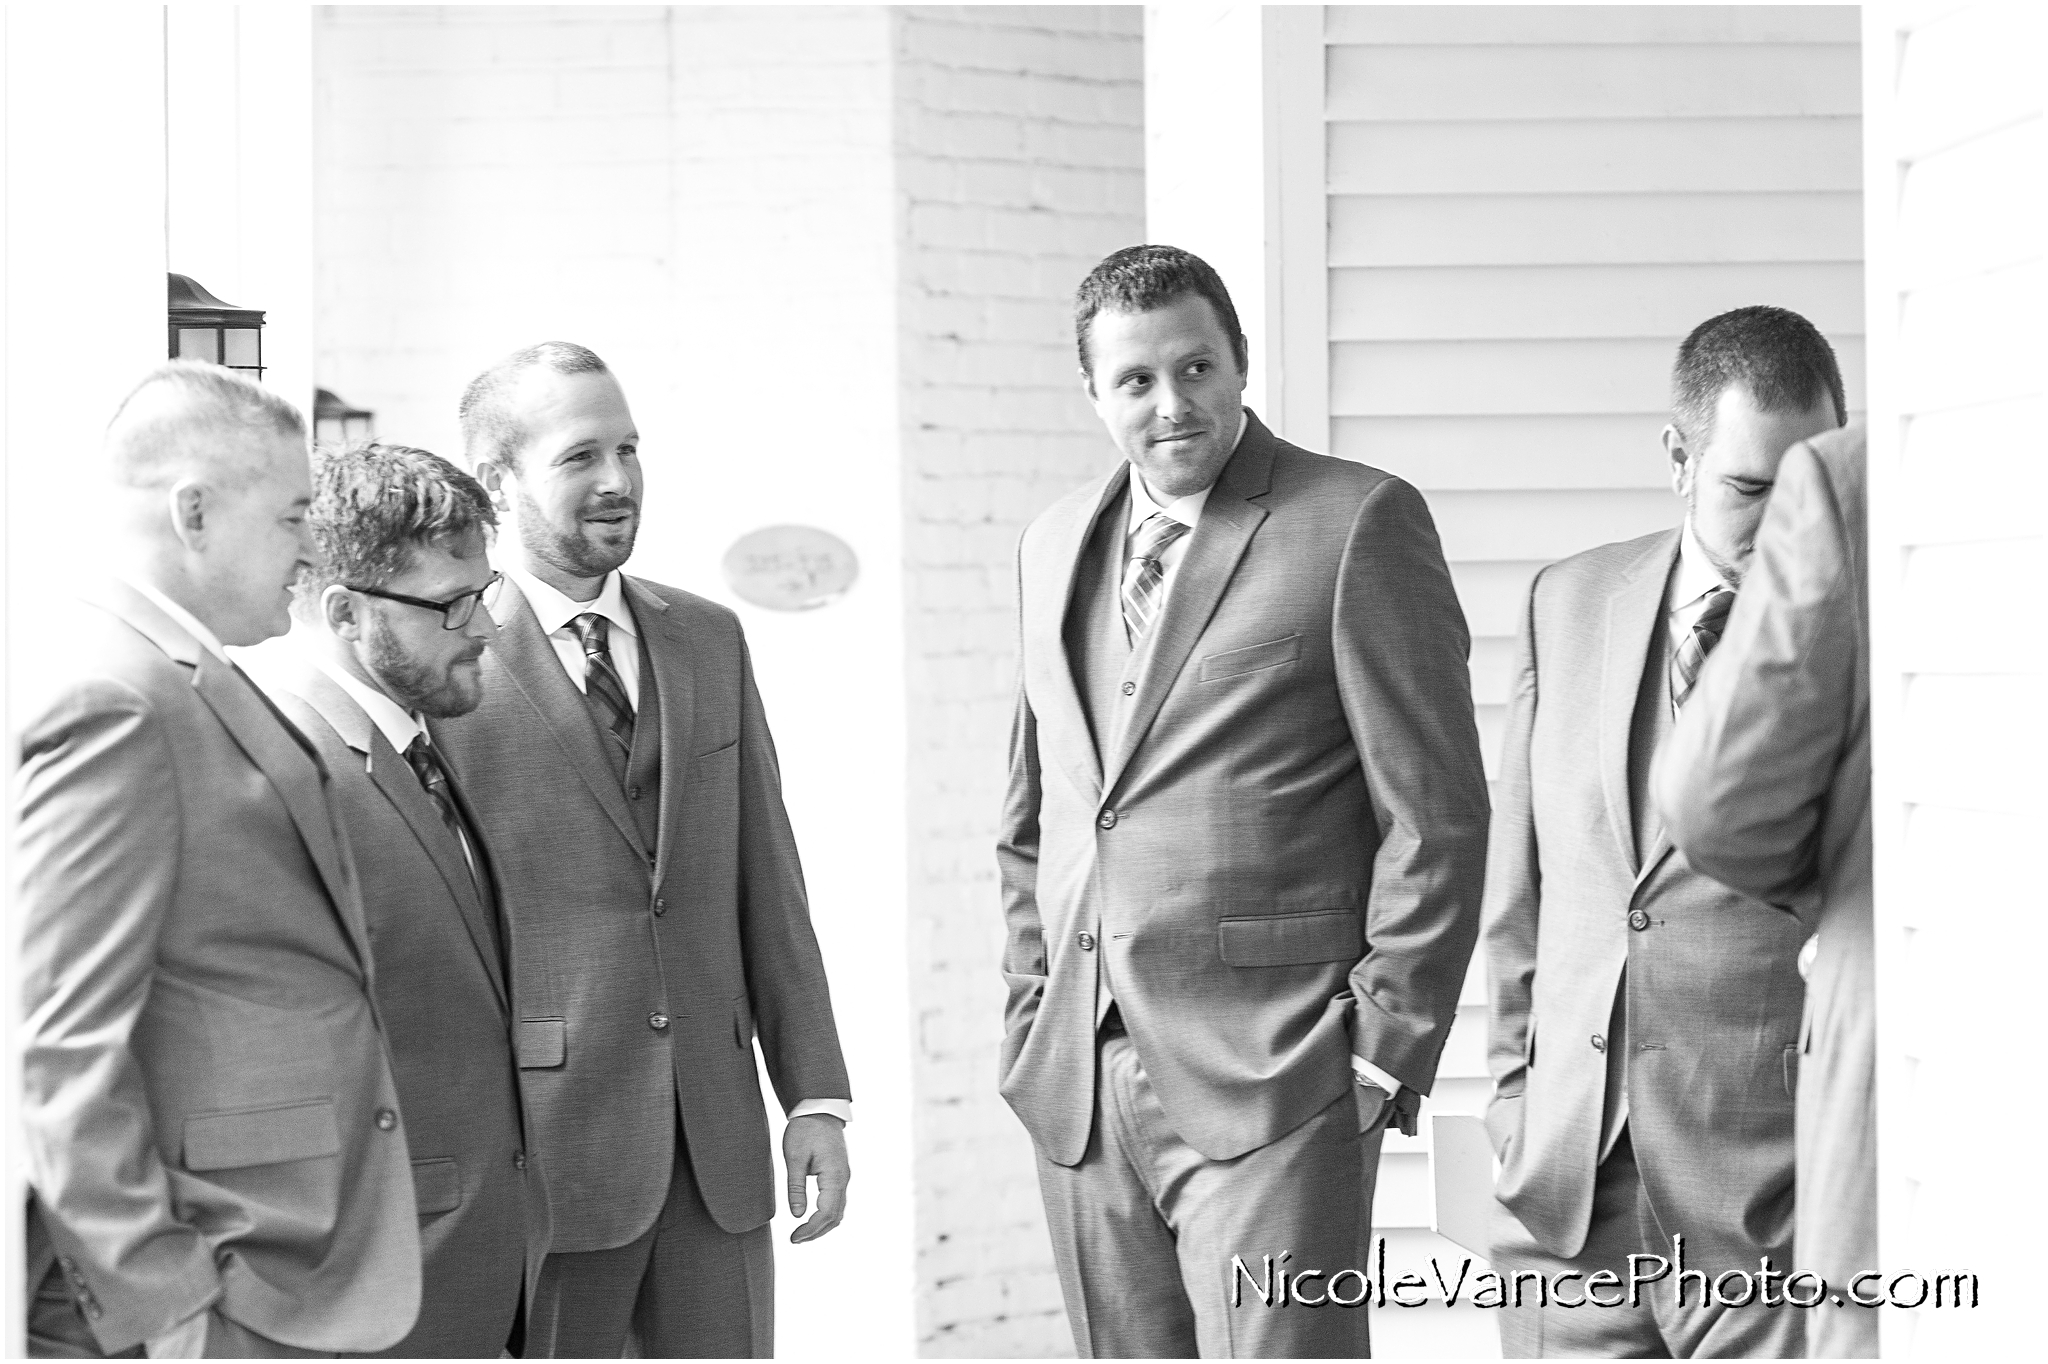 The groom enjoys a few minutes together with his groomsmen at the Linden Row Inn, in Richmond, VA.